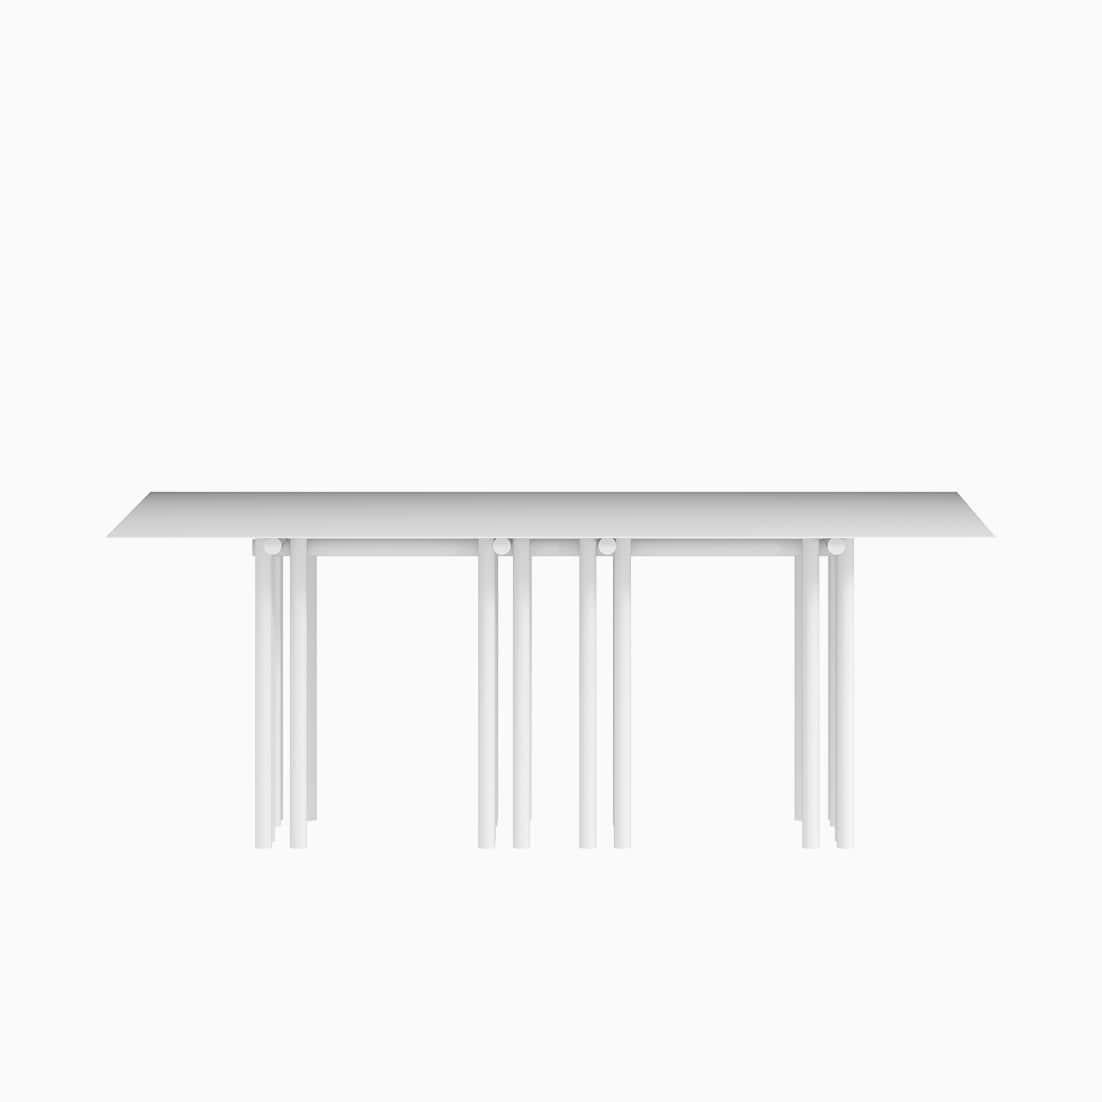 Mexican Black Dolmen Dining Table For Sale